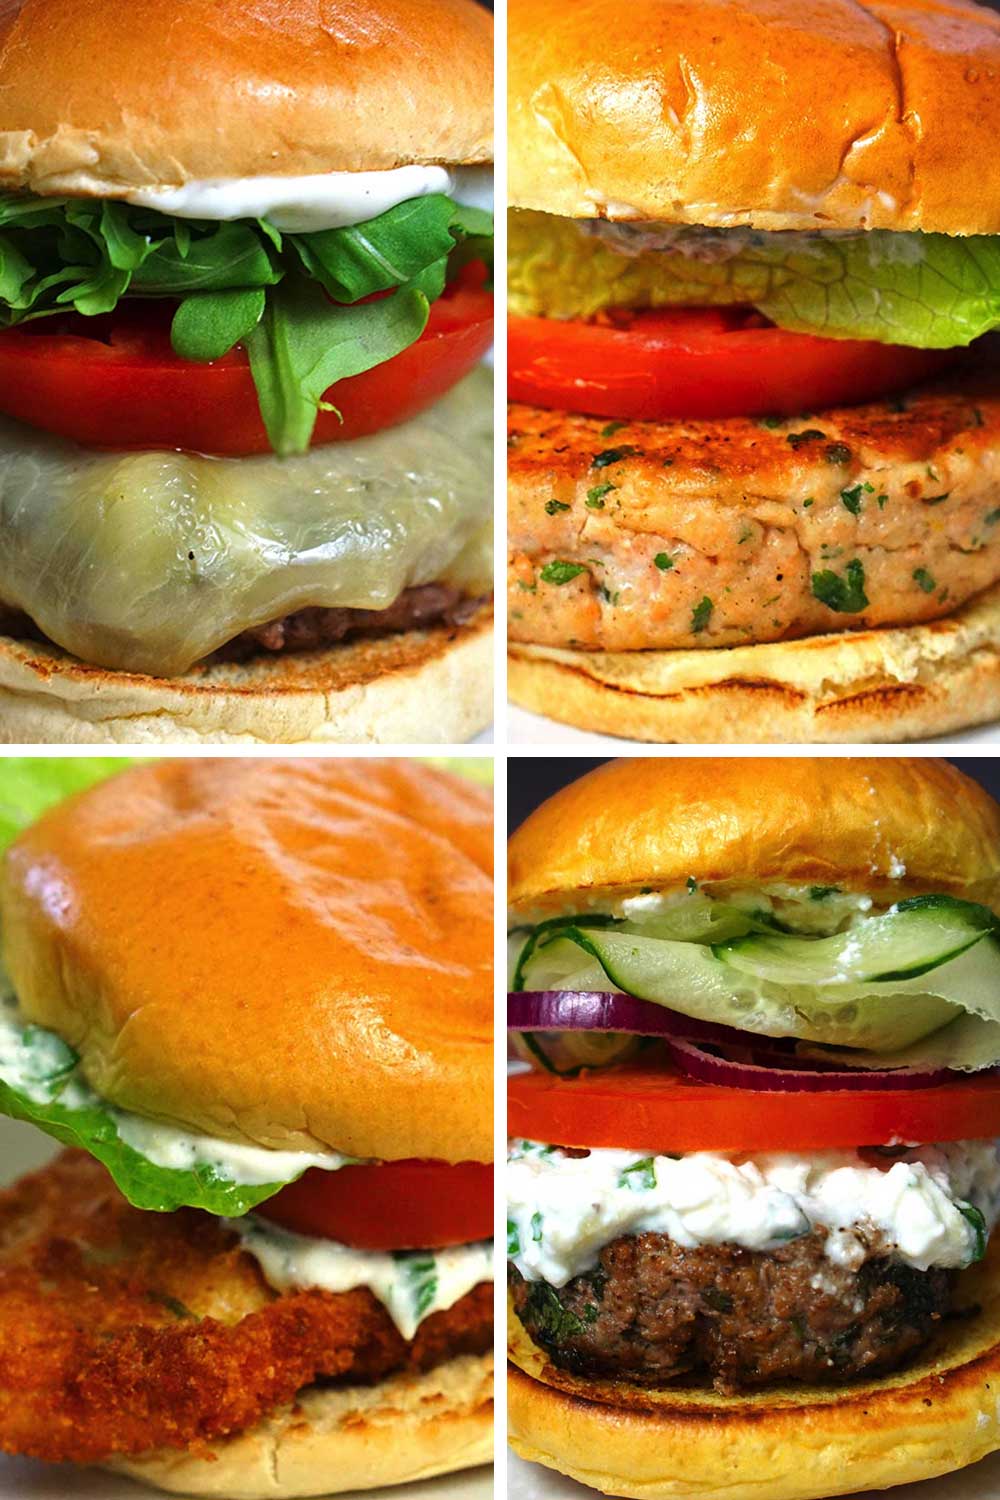 Burger Recipes You Need to Try: From Halloumi to Juicy Lucy